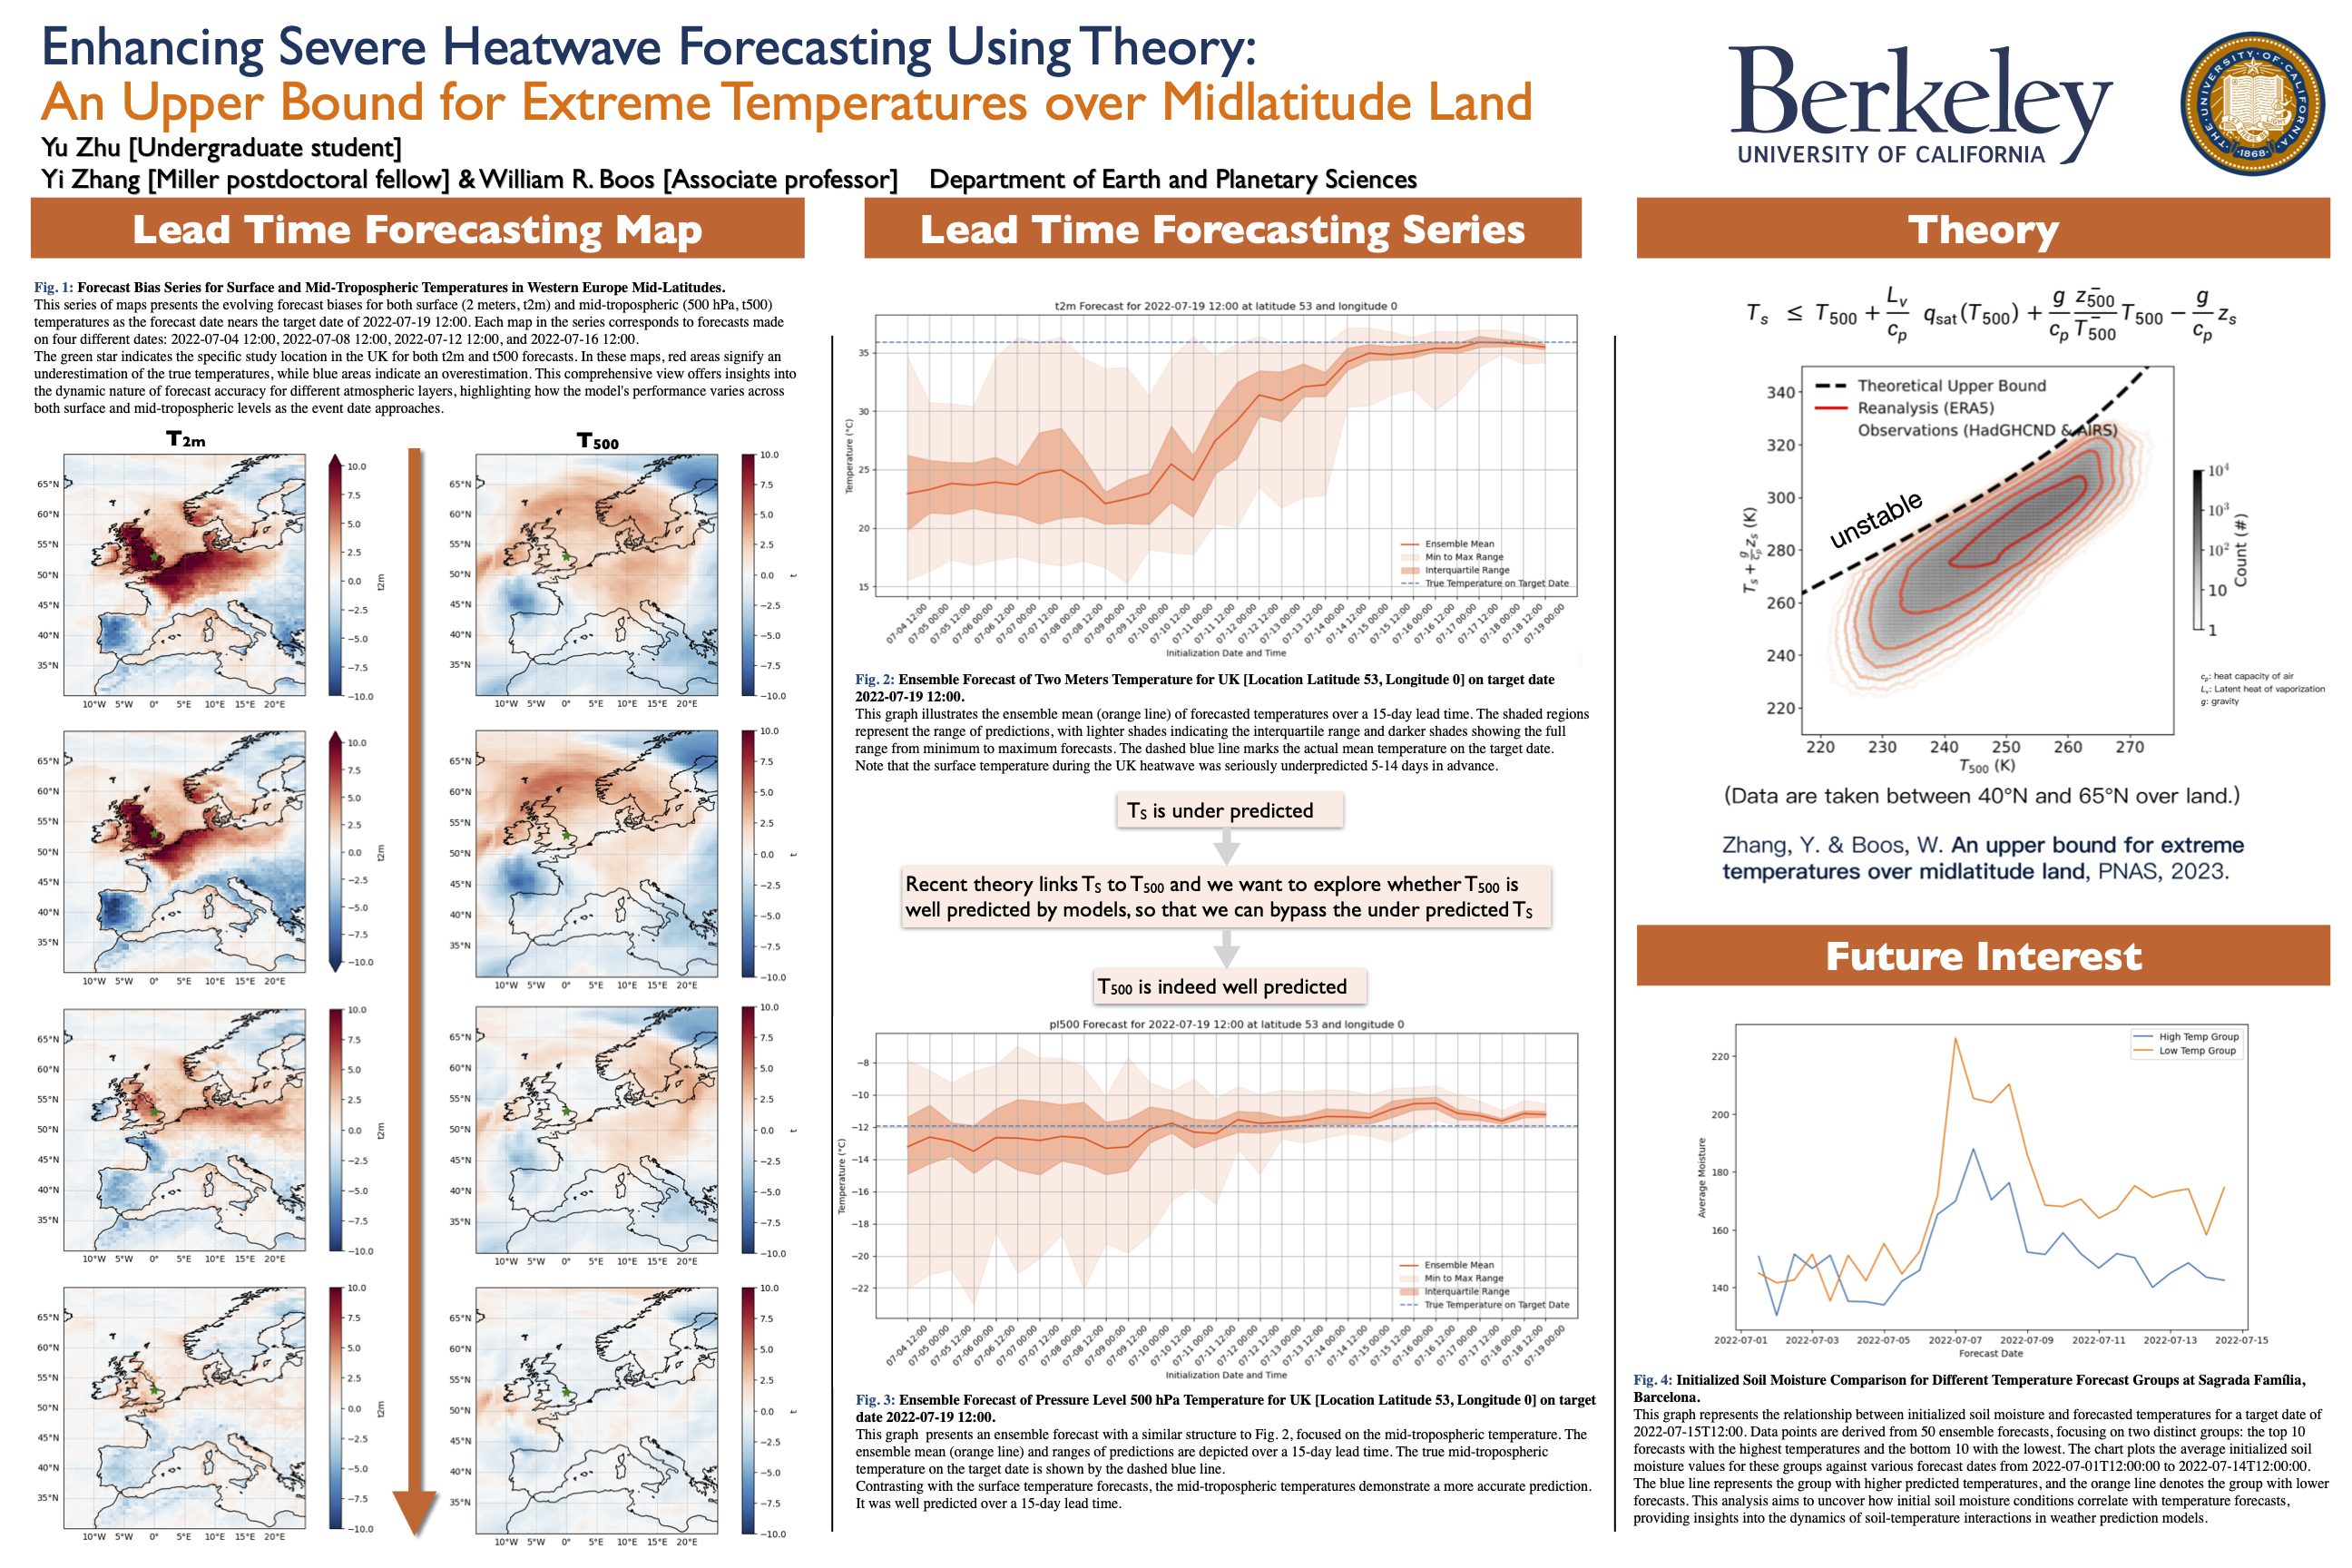 Enhancing Severe Heatwave Forecasting Using Theory and Data Science - Spring 2023 Discovery Project